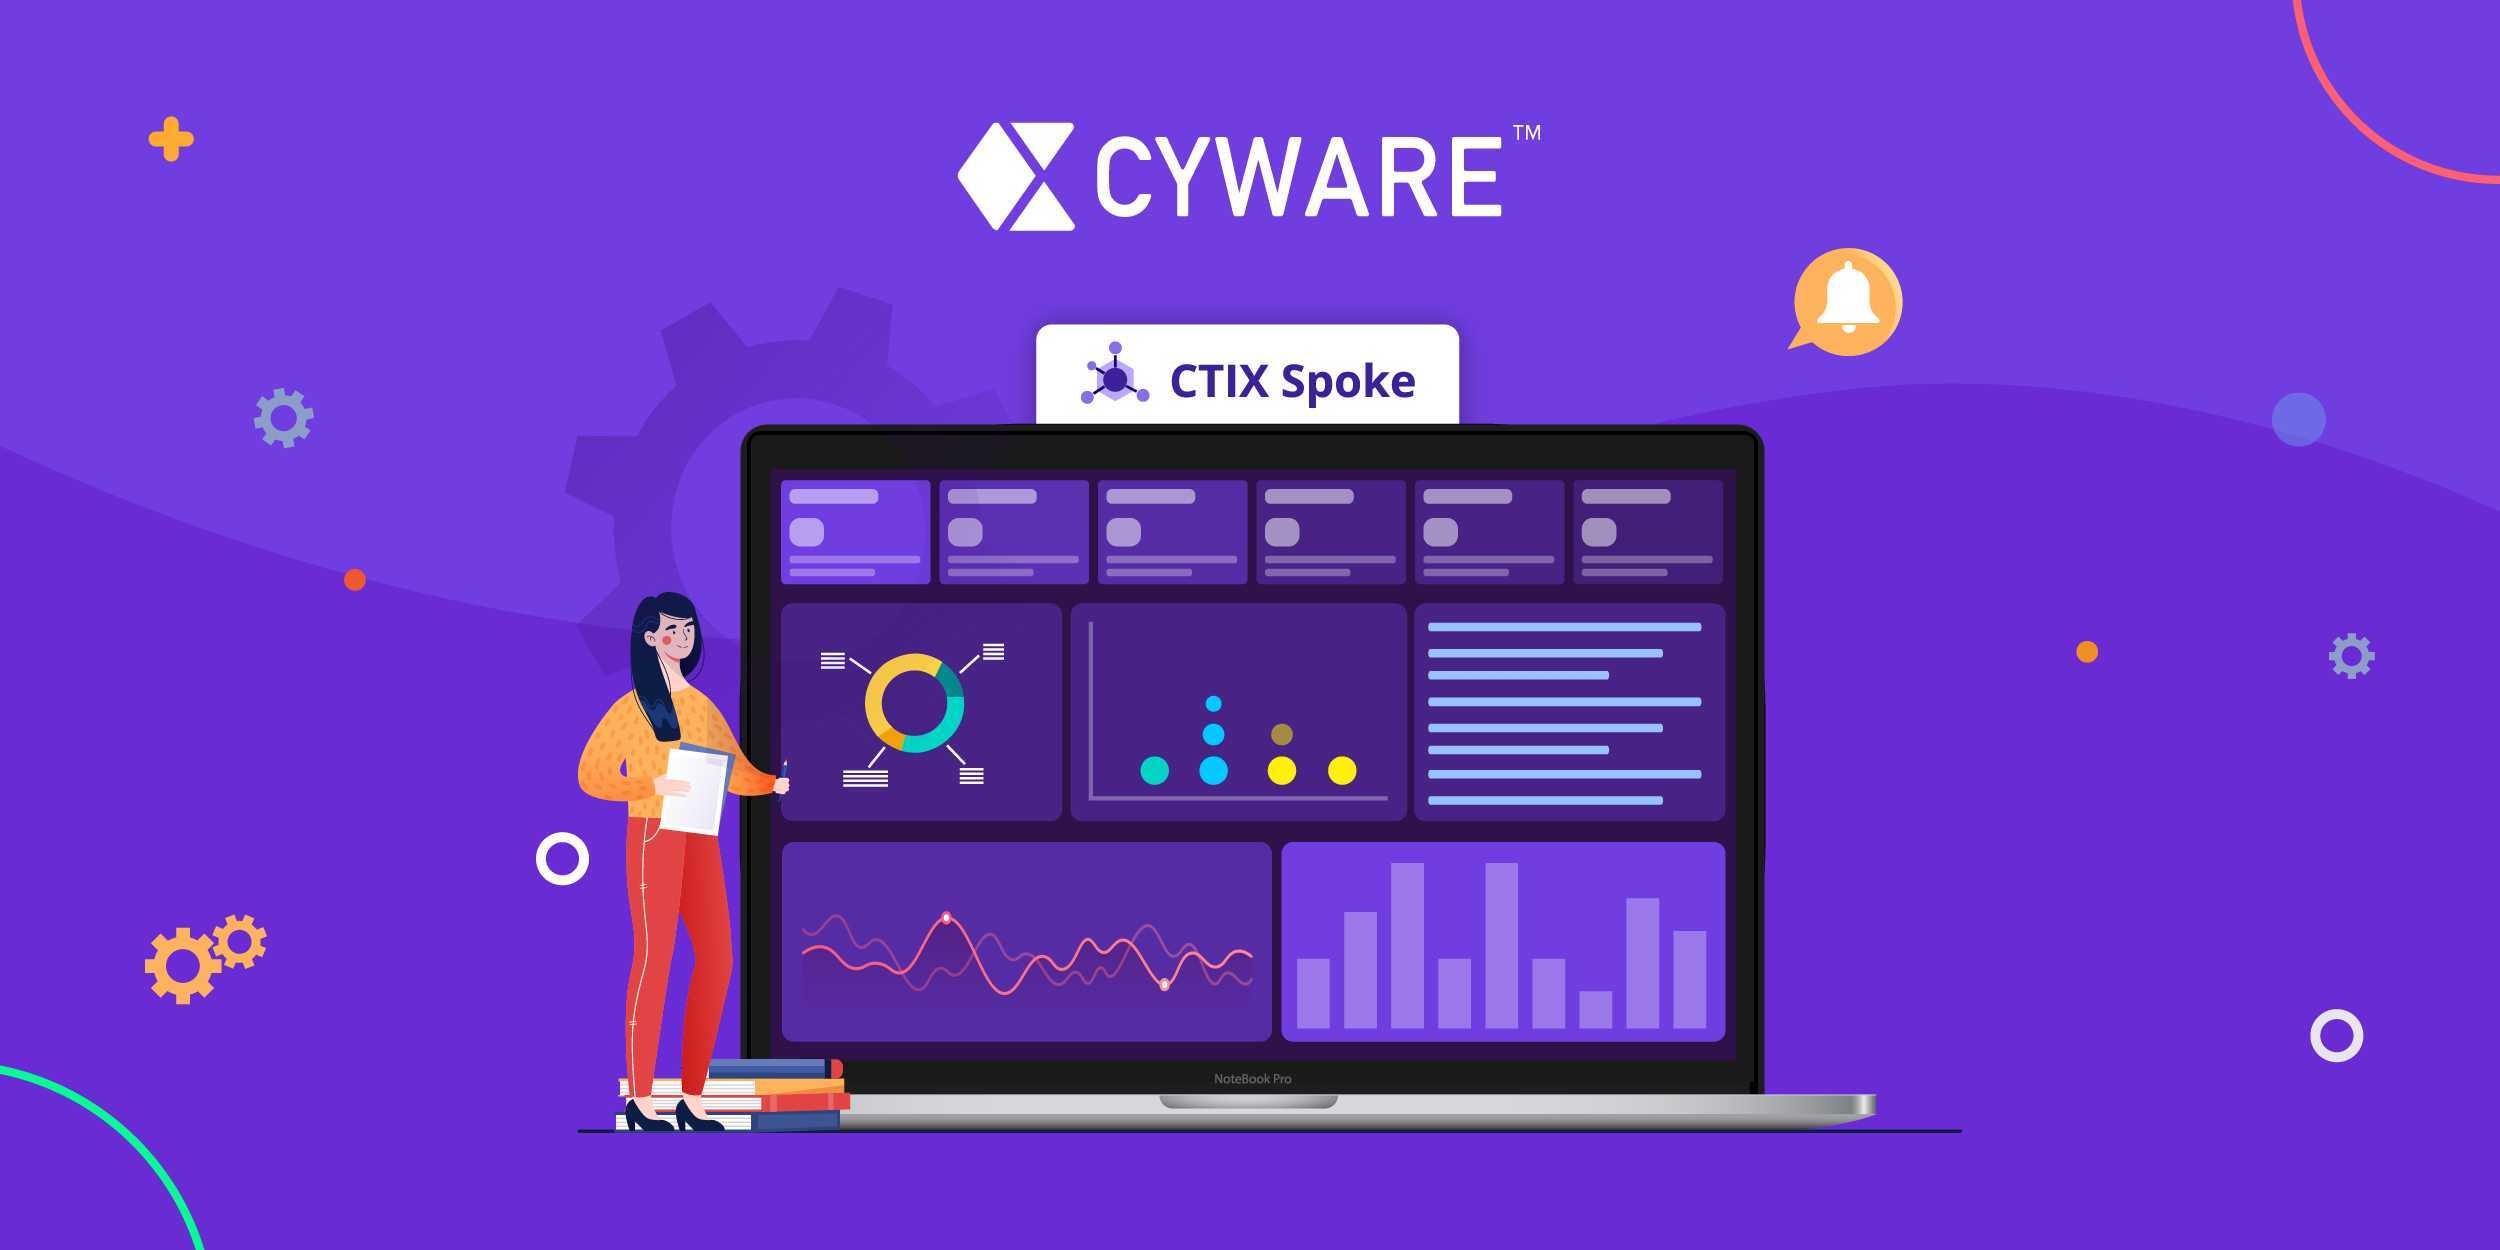 Cyware Announces CTIX Spoke – an Exclusive Threat Intelligence Processing and Collaboration Platform for ISAC/ISAO Members